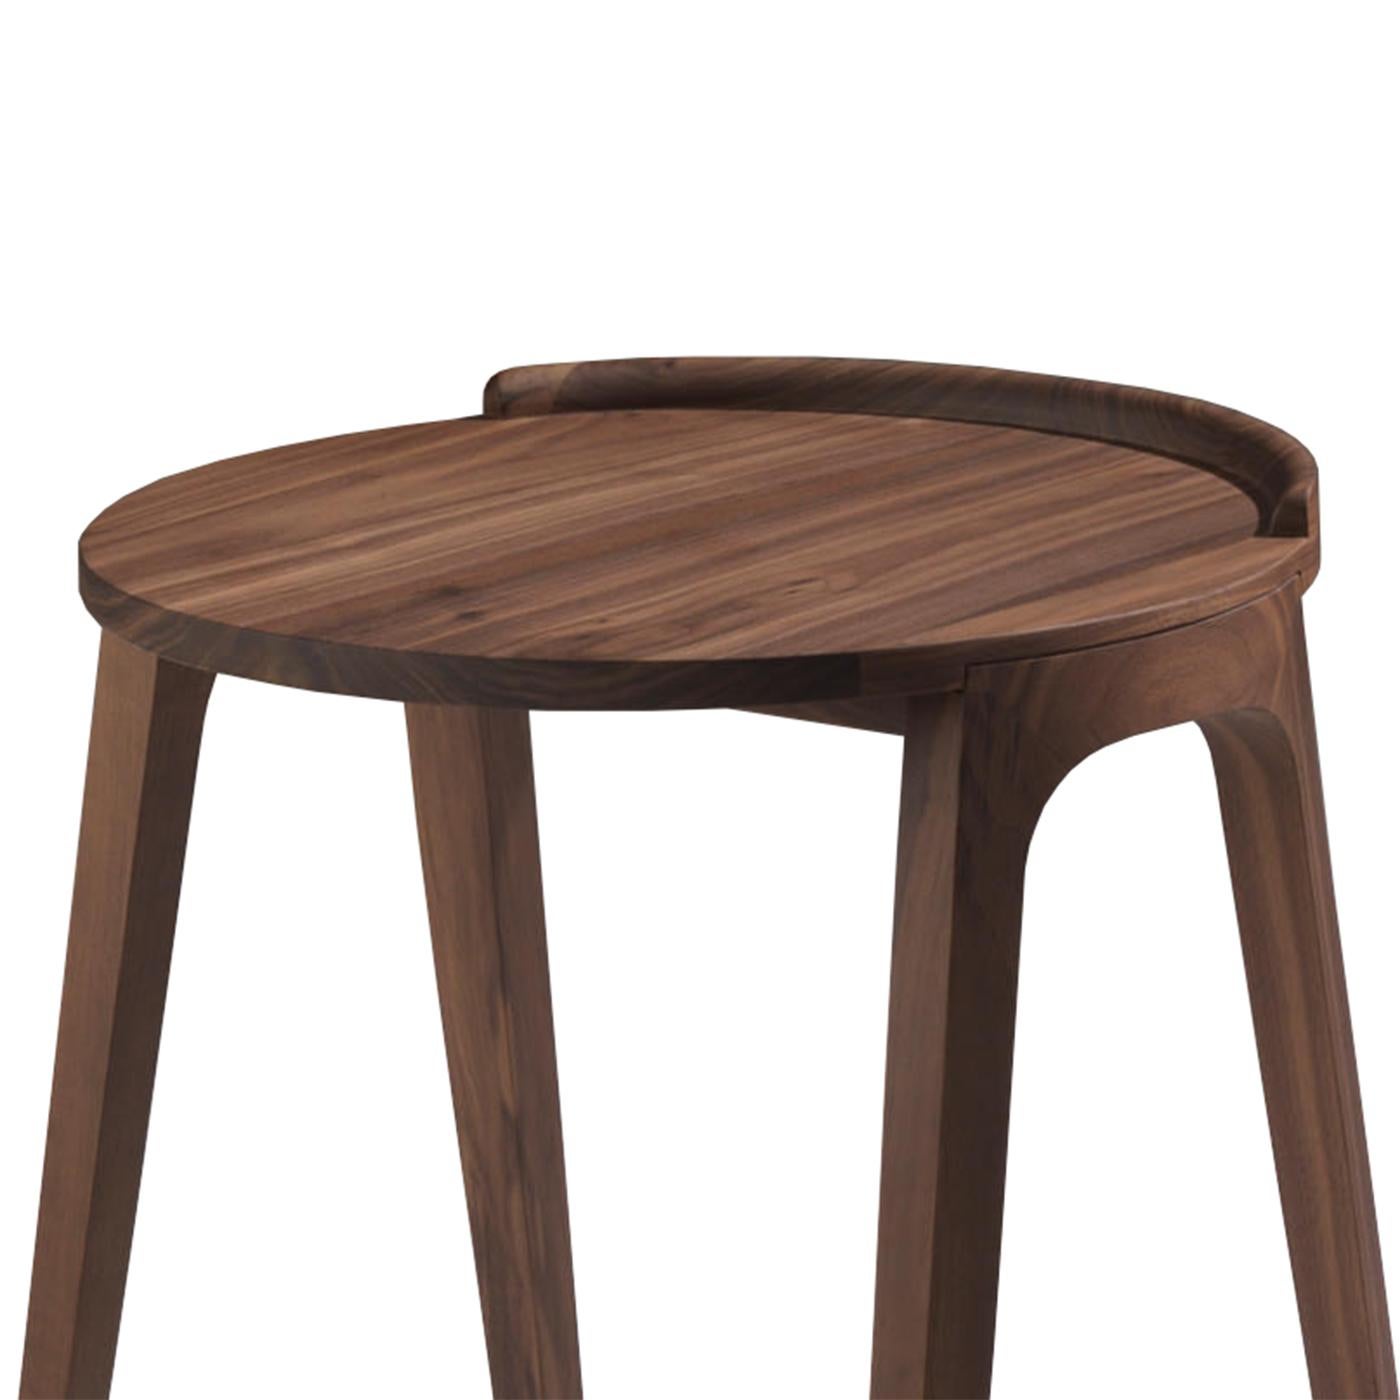 Side table terry all in solid
handcrafted walnut wood.